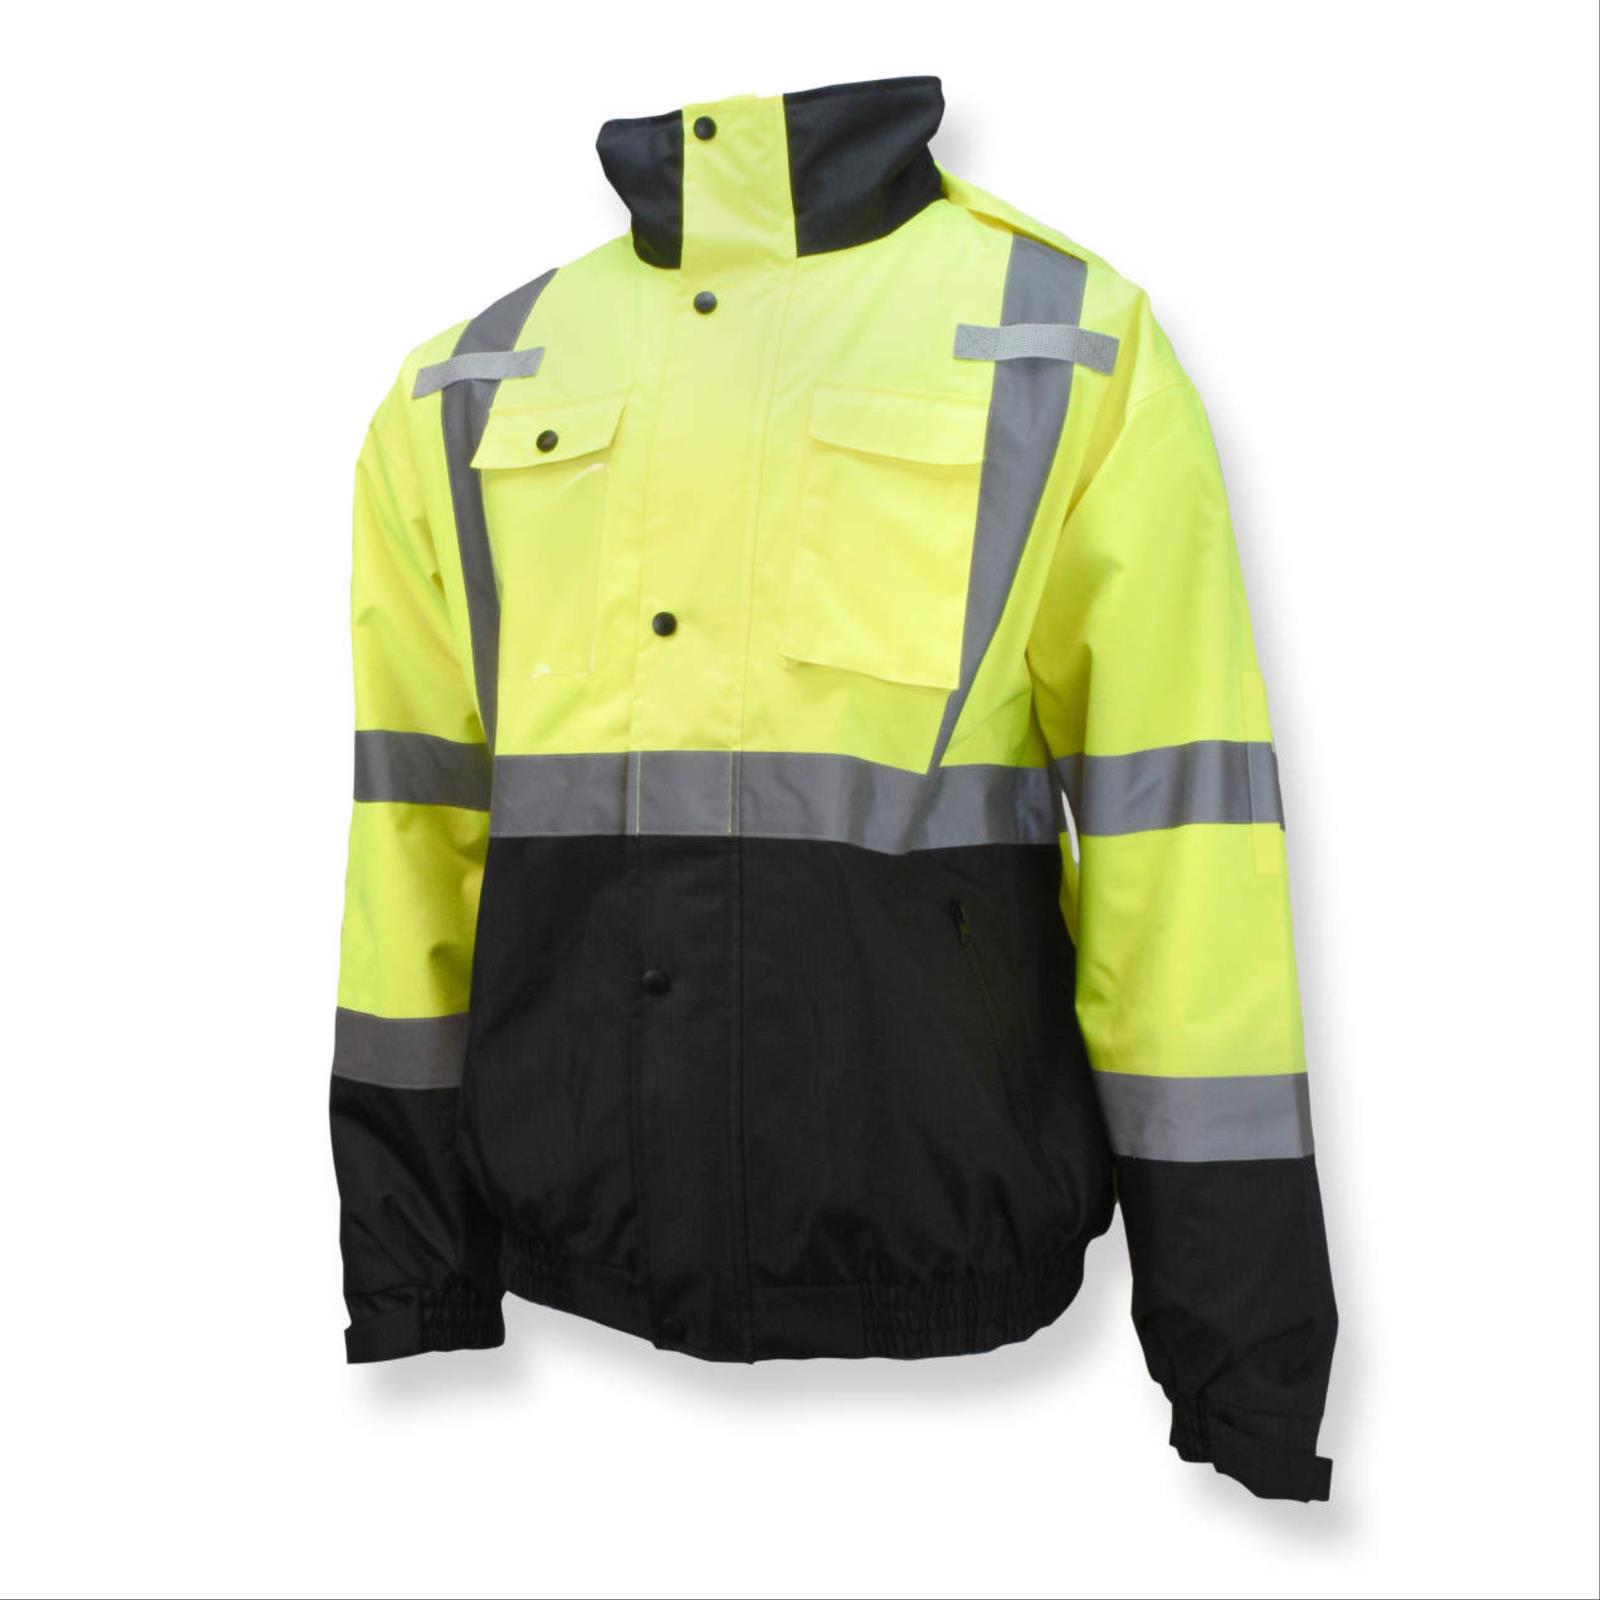 3-in-1 Ripstop Bomber Jacket, Color Blocking, Type R Class 3